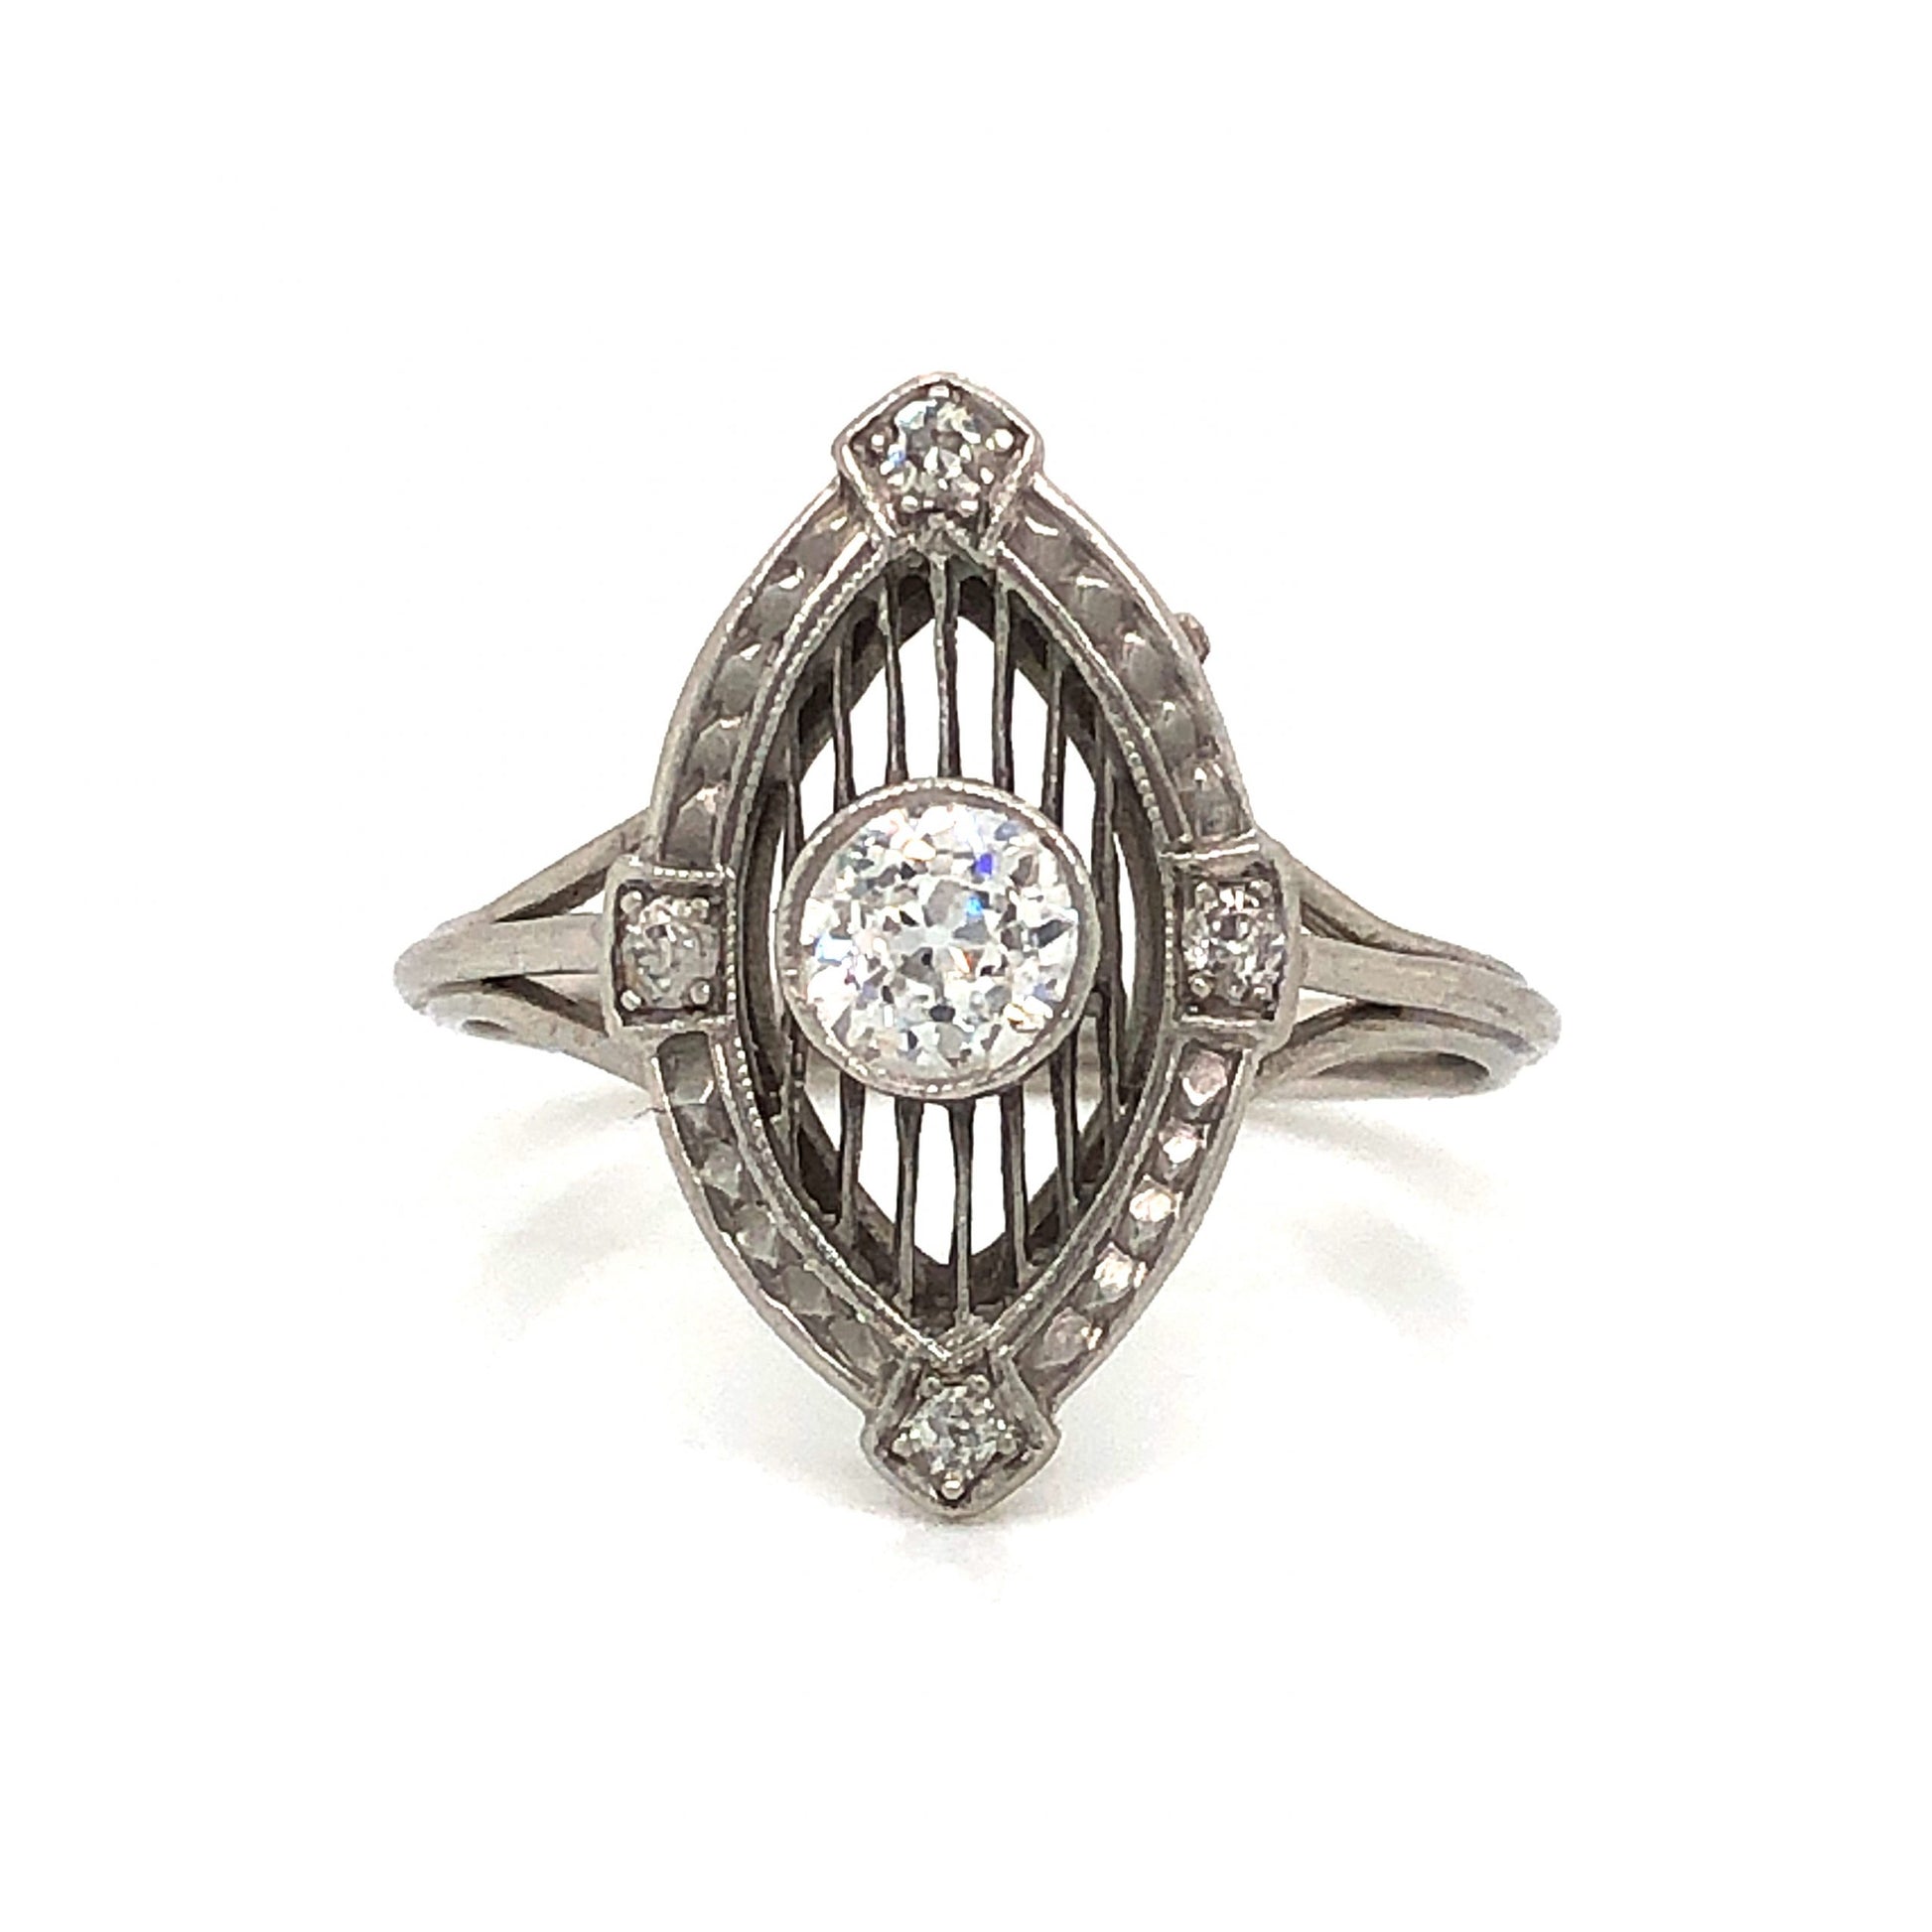 Marquise Shaped Art Deco Diamond Cocktail Ring in PlatinumComposition: PlatinumRing Size: 4.75Total Diamond Weight: .32 ctTotal Gram Weight: 2.7 g